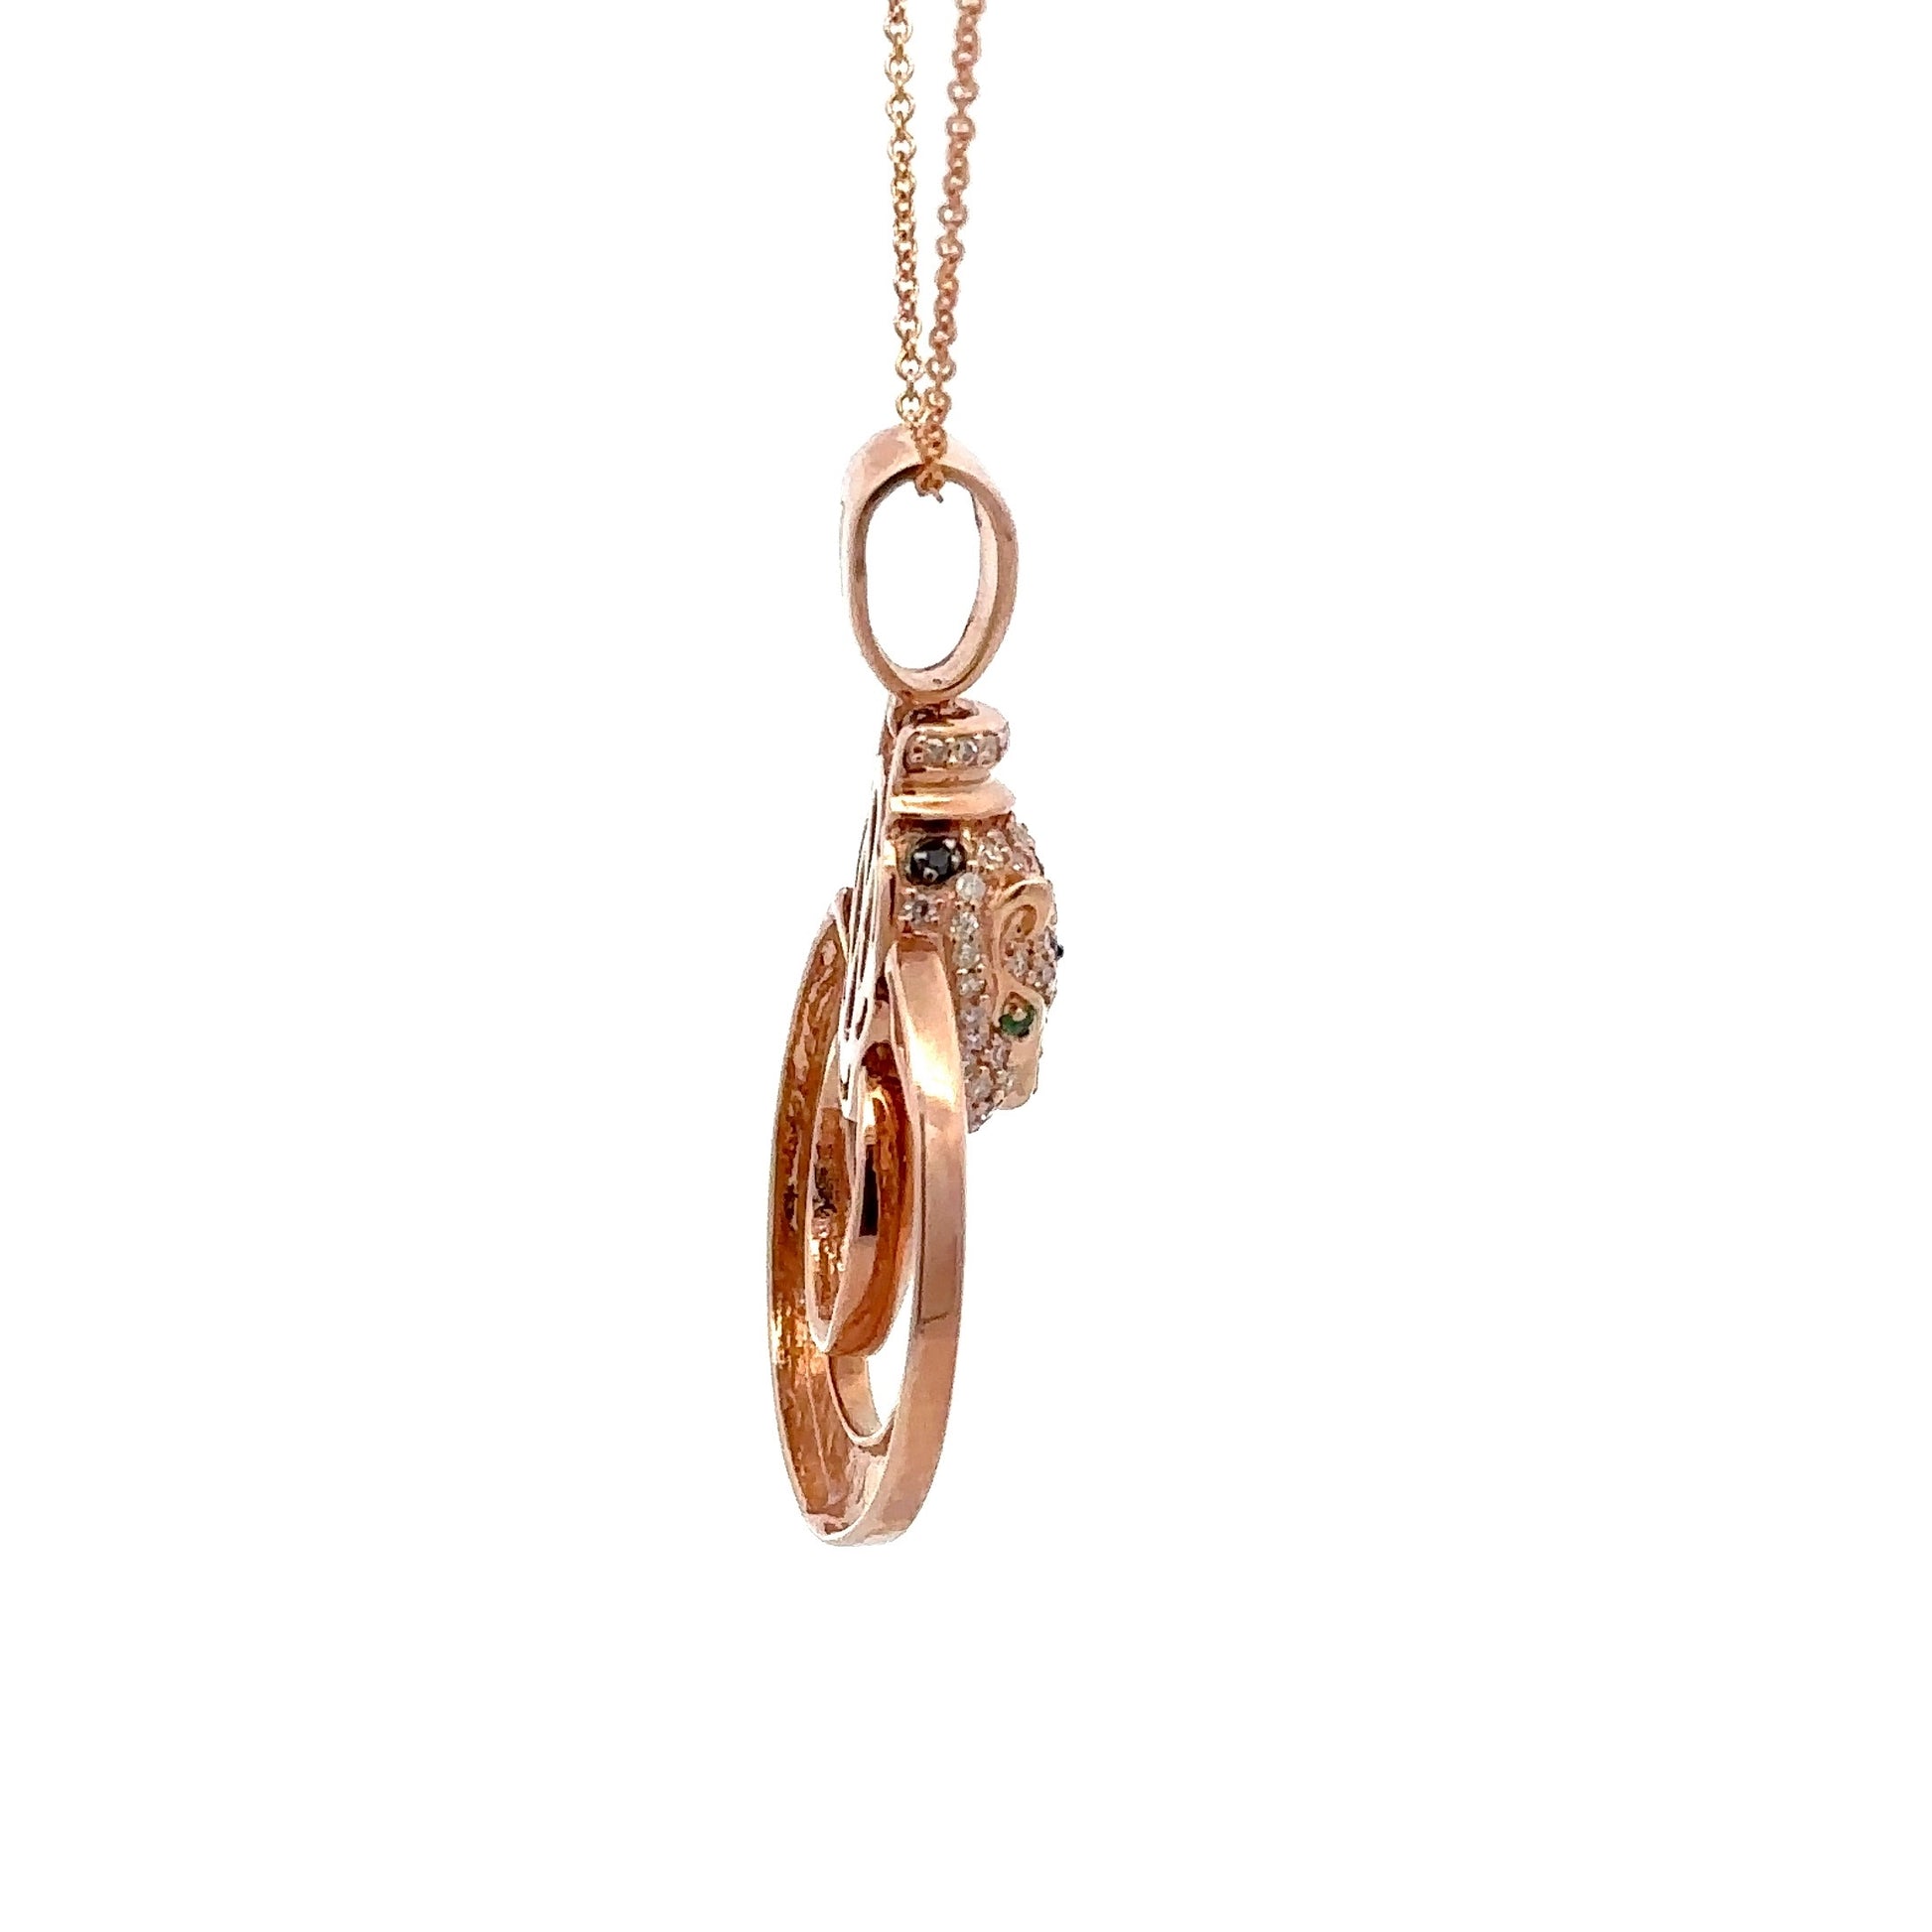 Side of rose gold pendant with round bail